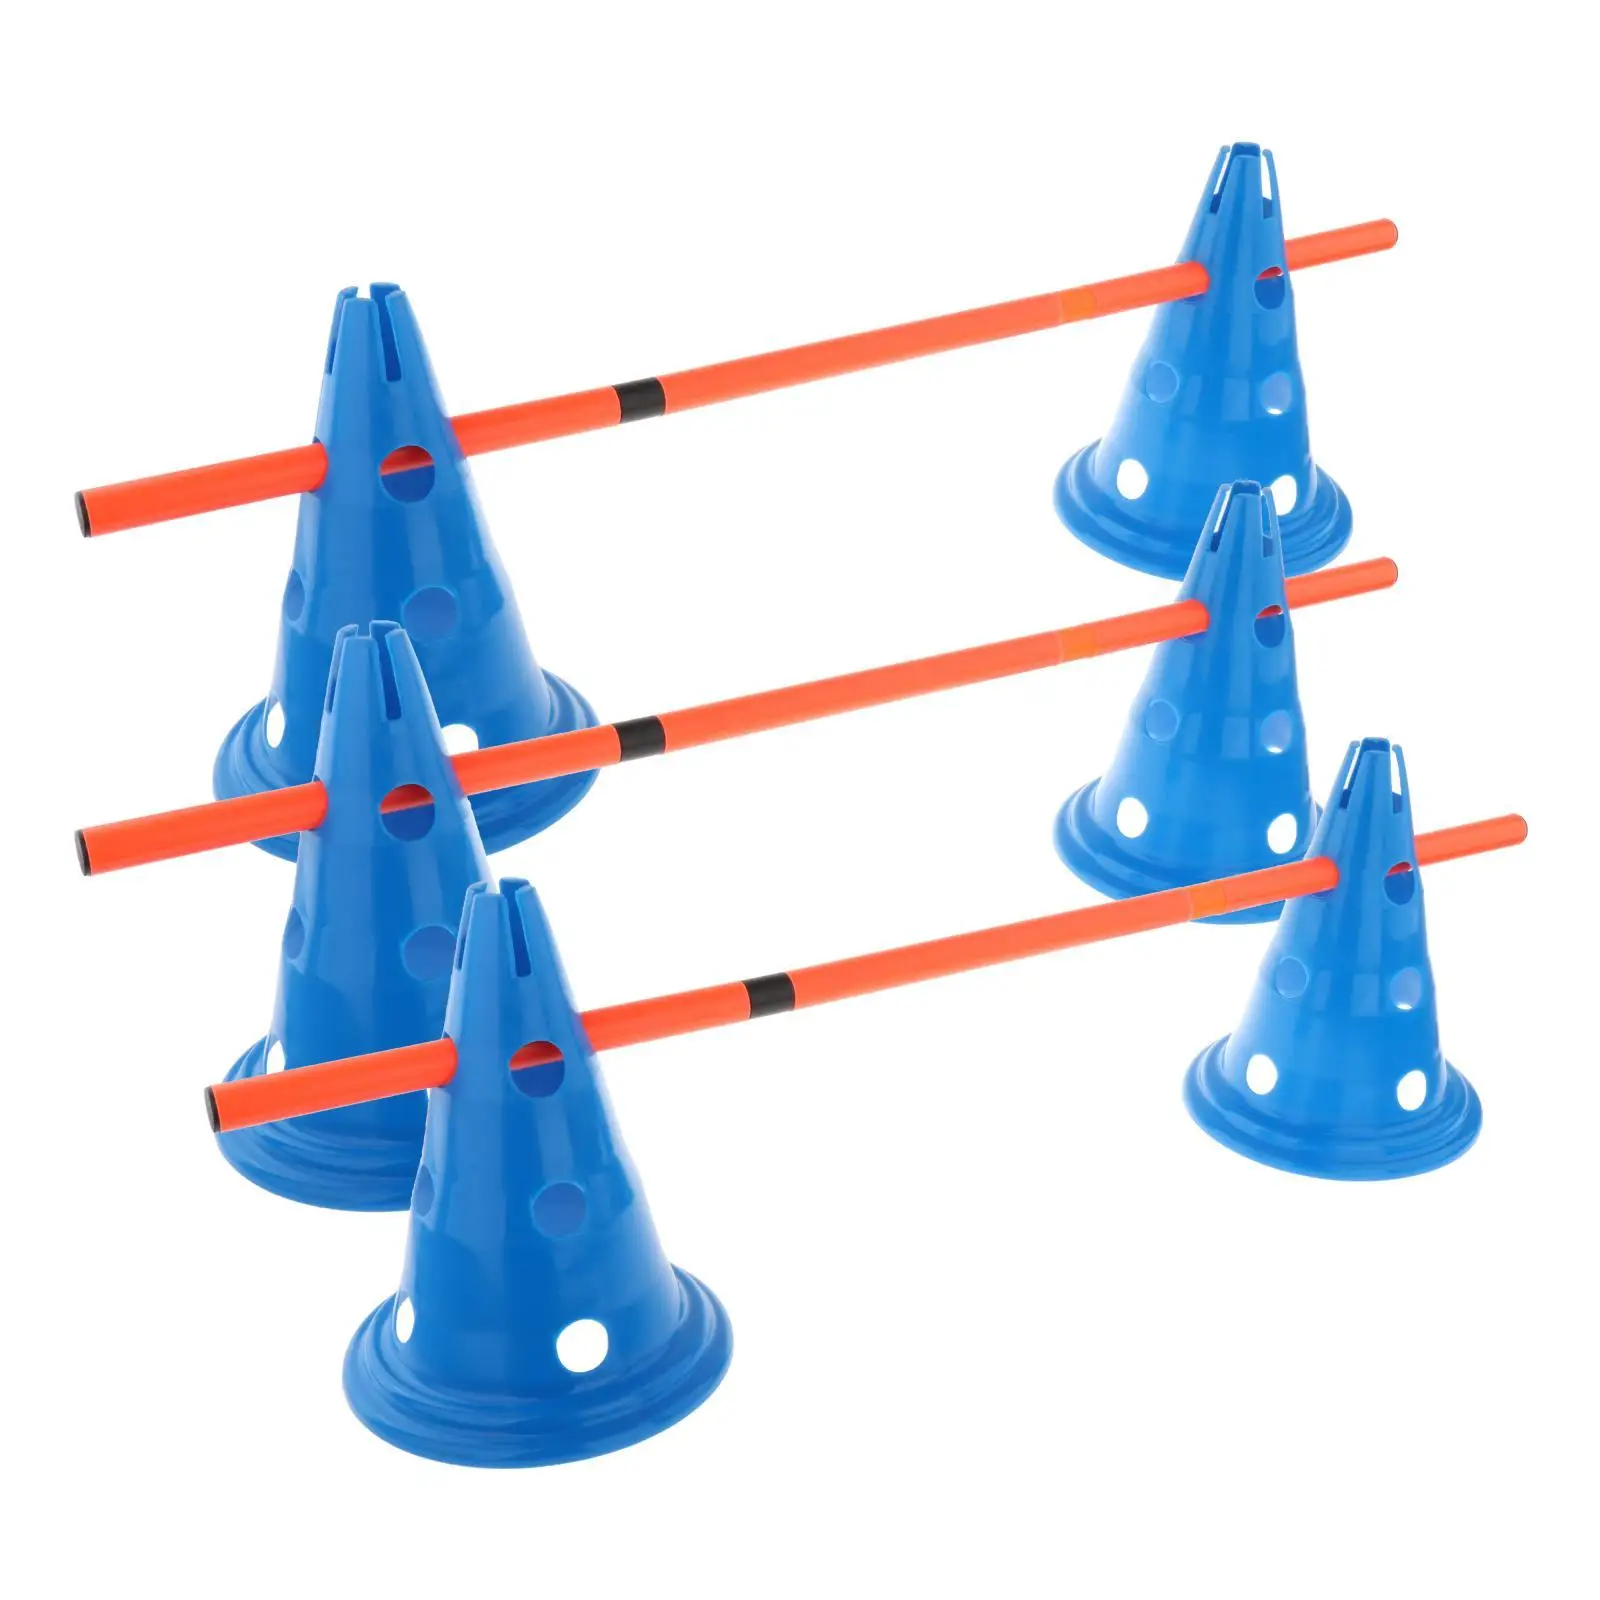 Hurdle Cones Course with Poles Adjustable Agility Equipment Set for Running